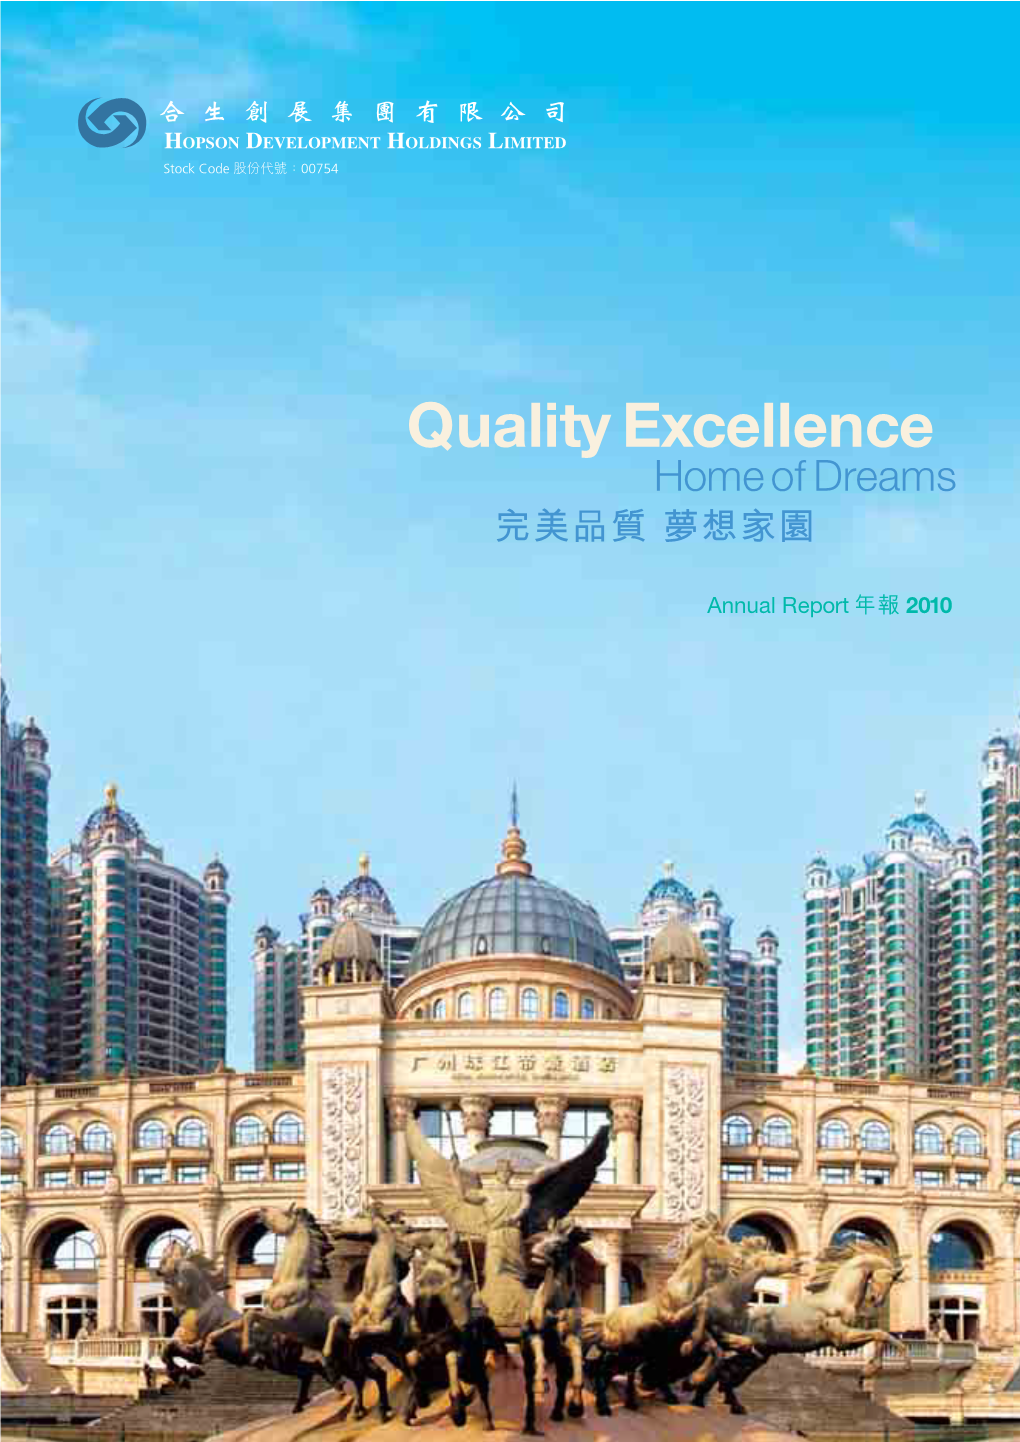 Quality Excellence Home of Dreams 完美品質 夢想家園